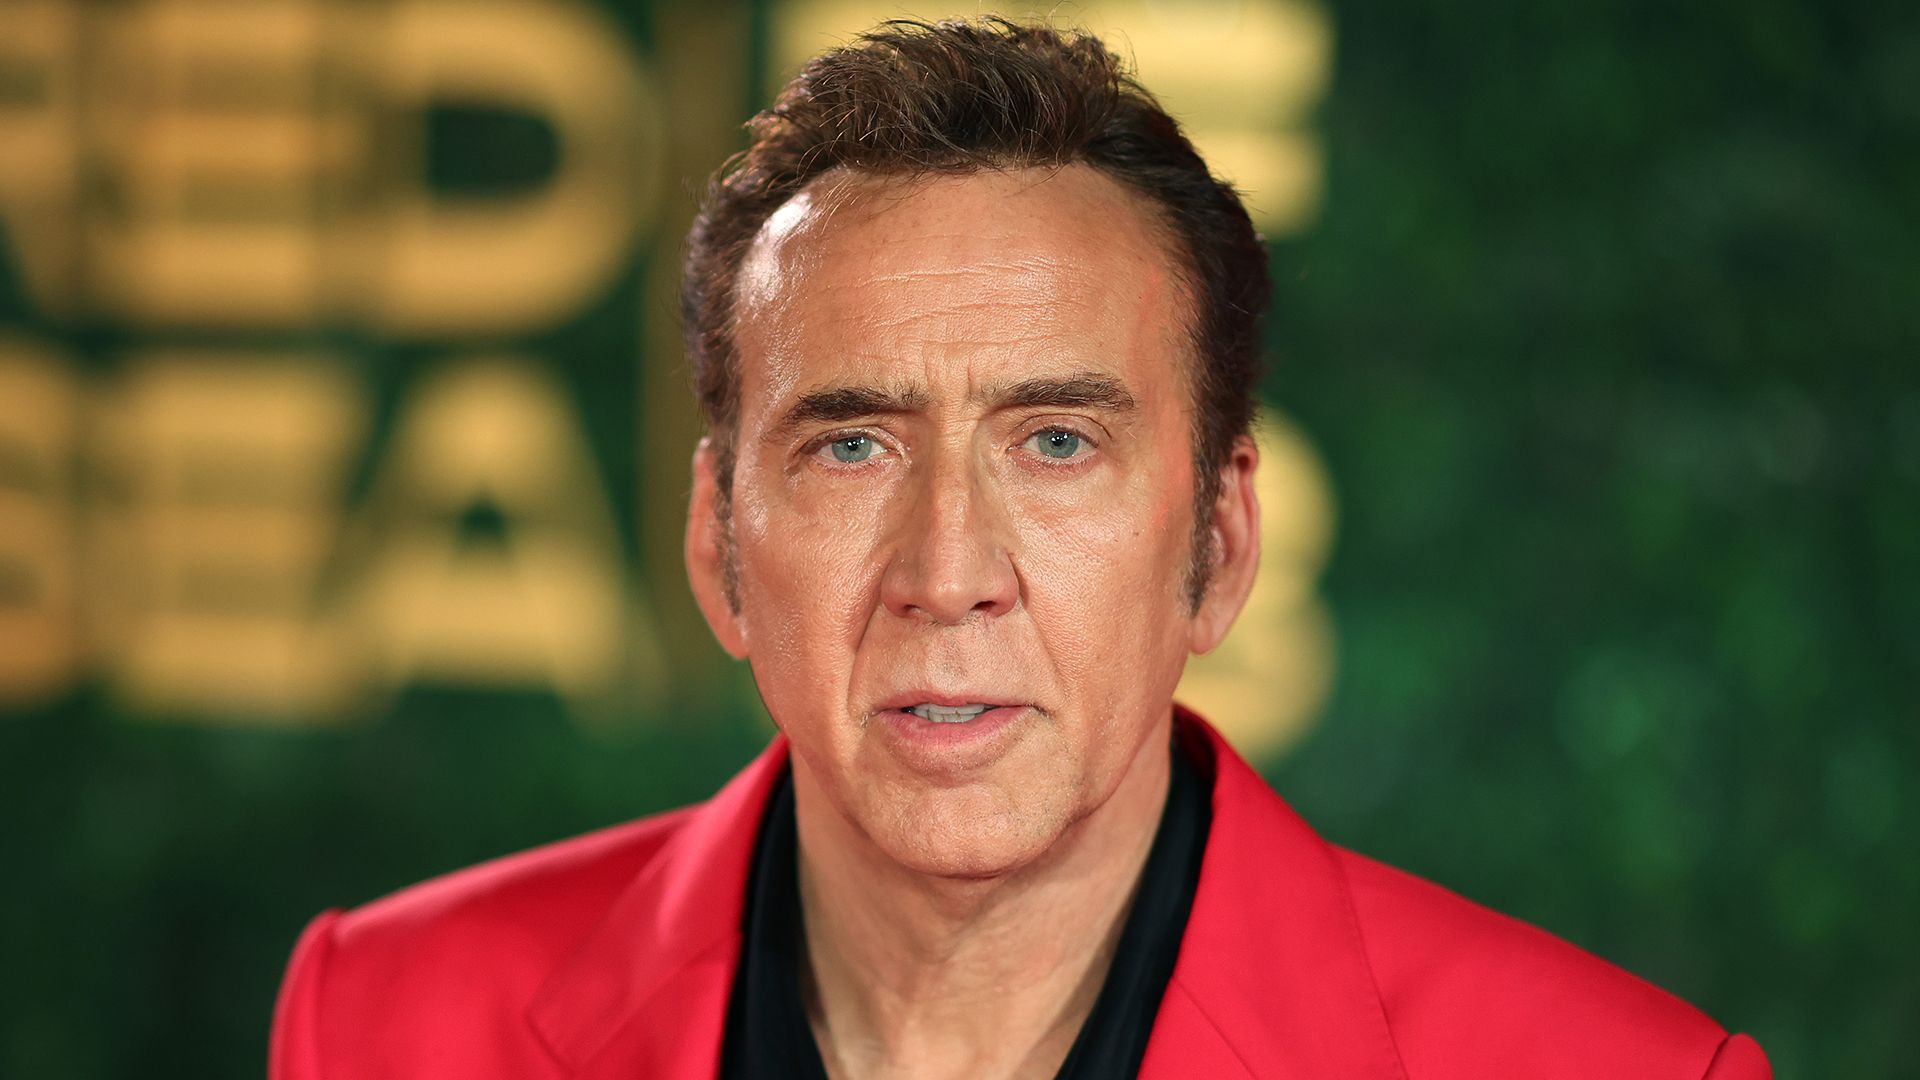 Nicolas Cage wearing a red suit at The Red Sea International Film Festival 2023